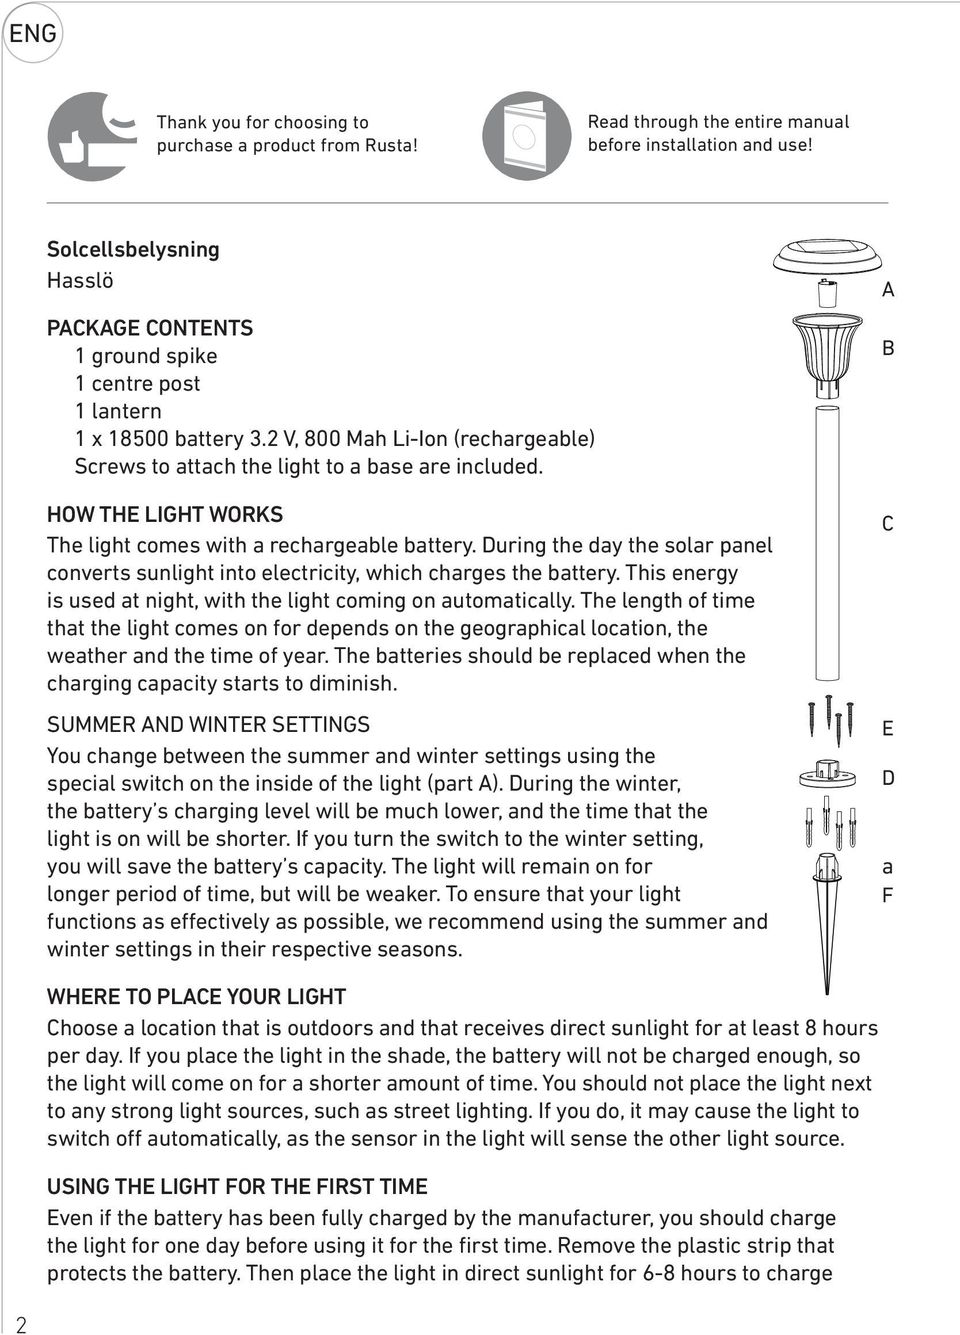 HOW THE LIGHT WORKS The light comes with a rechargeable battery. During the day the solar panel converts sunlight into electricity, which charges the battery.